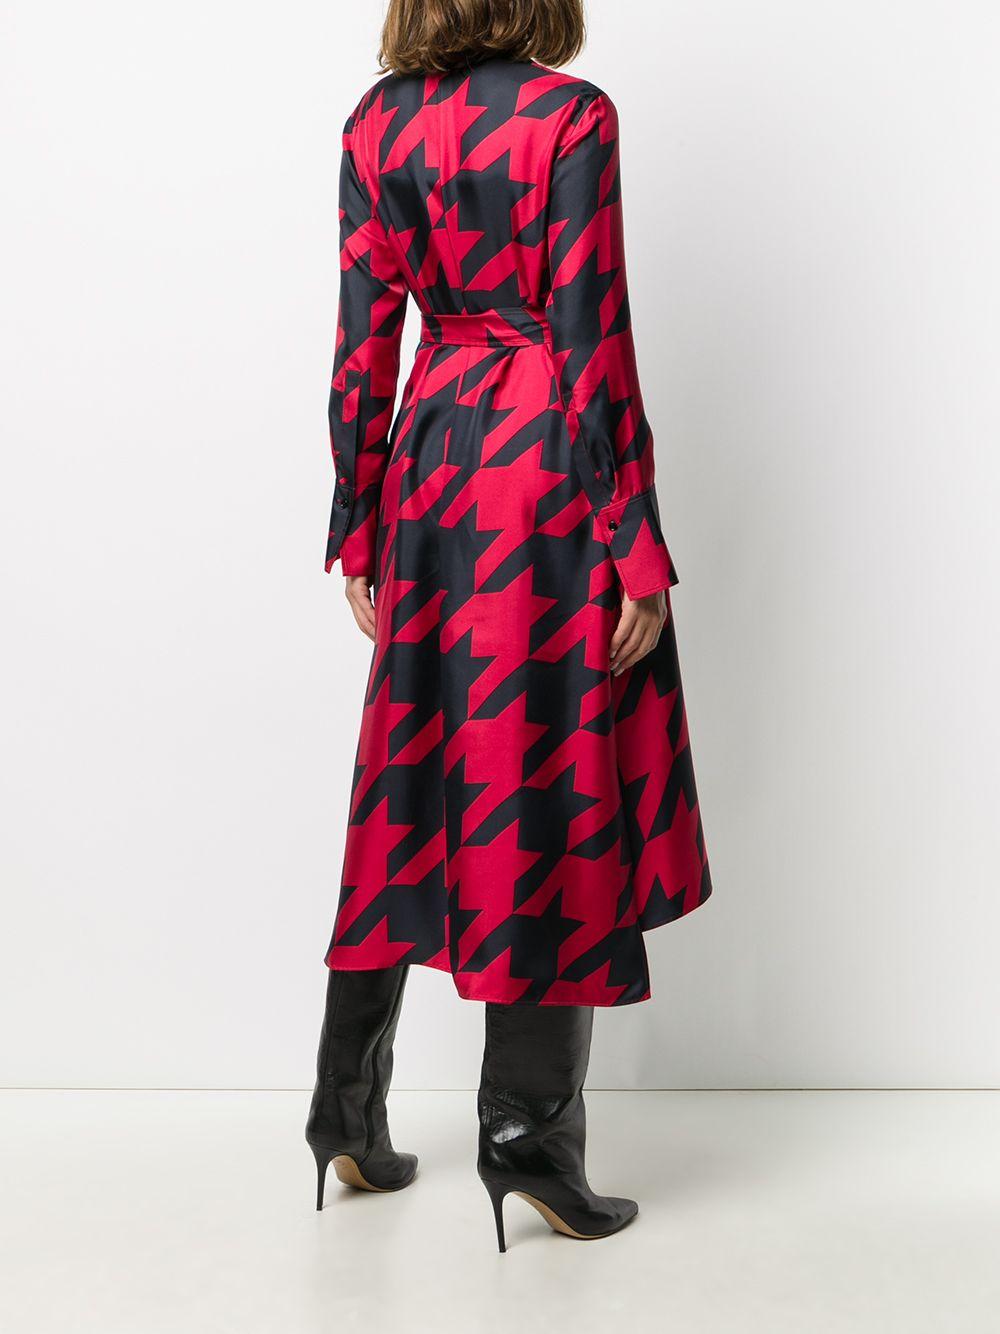 BOSS by HUGO BOSS Giant Houndstooth Print Shirt Dress in Red | Lyst Canada